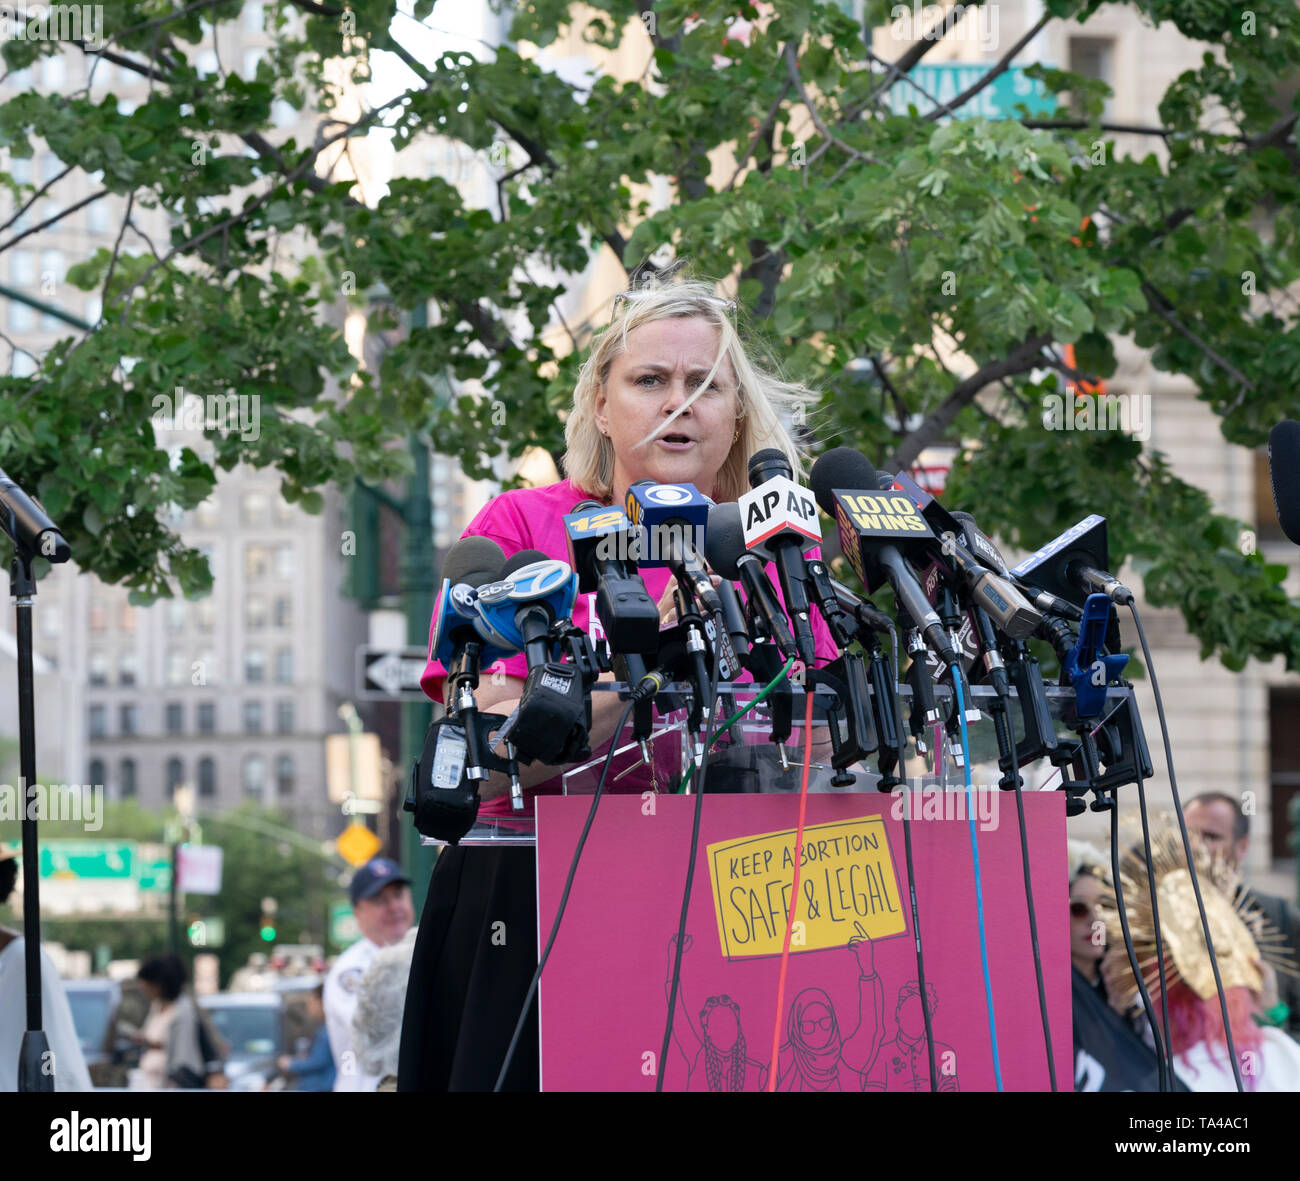 New York, NY - May 21, 2019: Laura McQuade speaks at pro-choice rally for women rights organized by Planned Parenthood on Foley Square Stock Photo